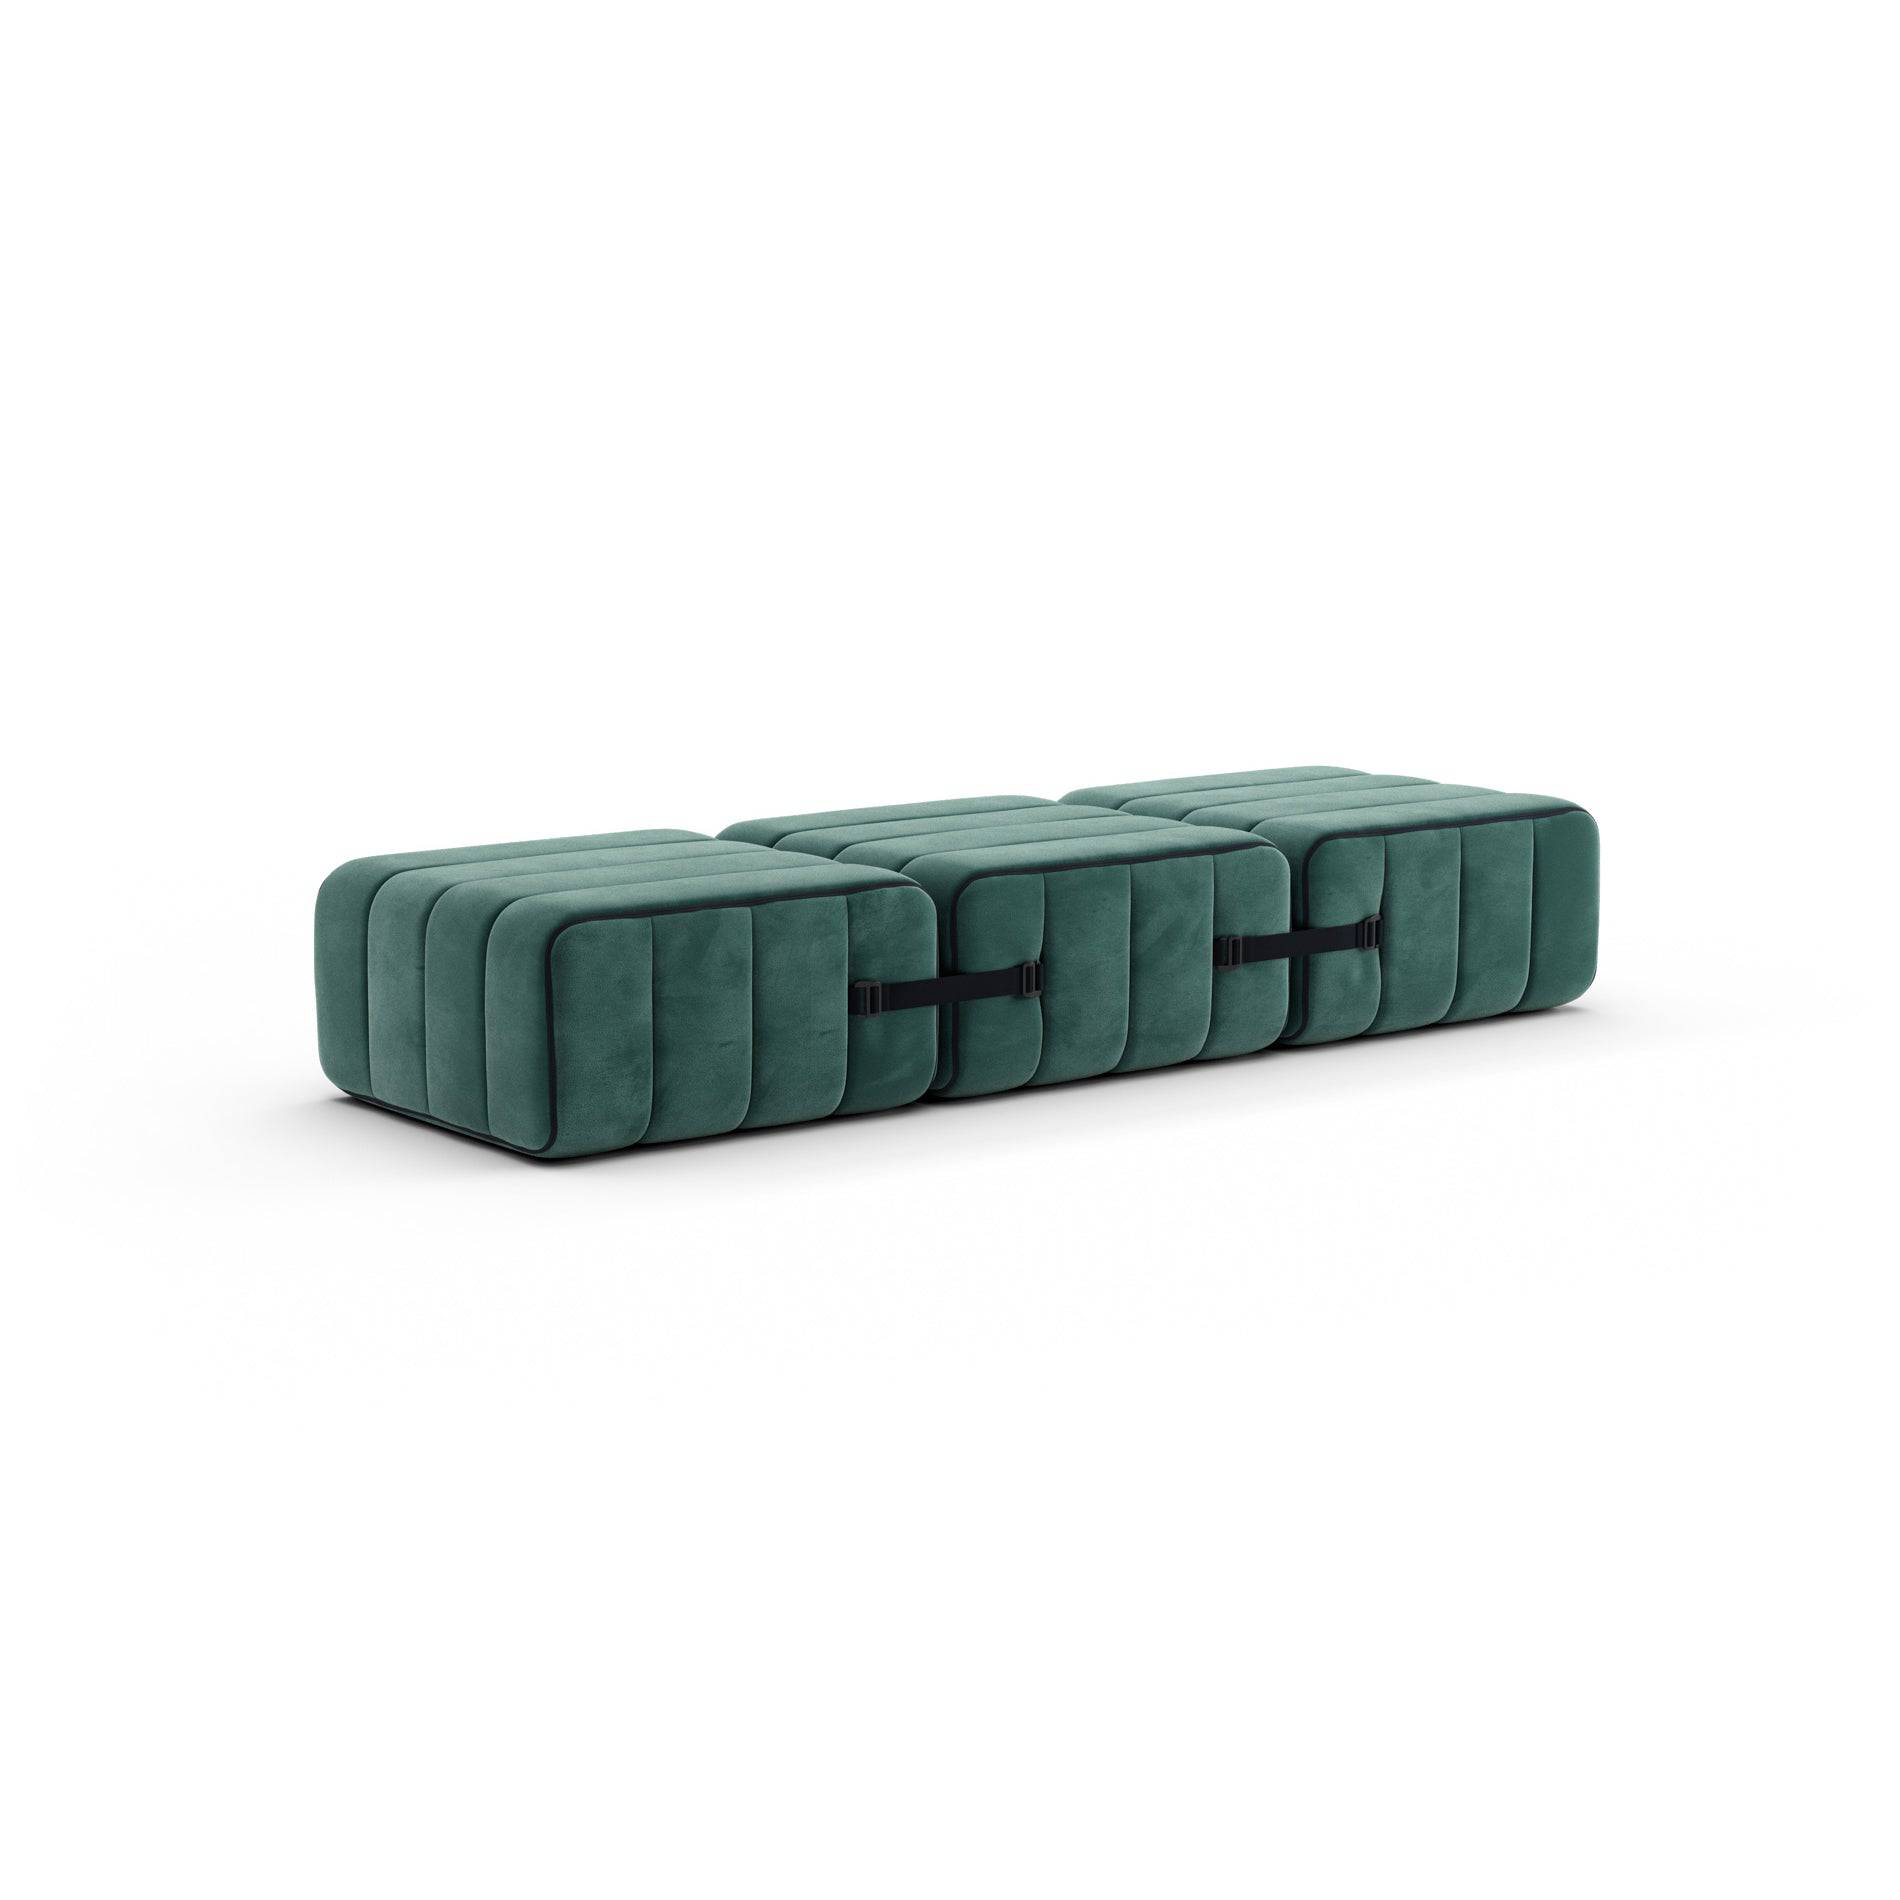 Curt Sofa System - Serpentine - THAT COOL LIVING